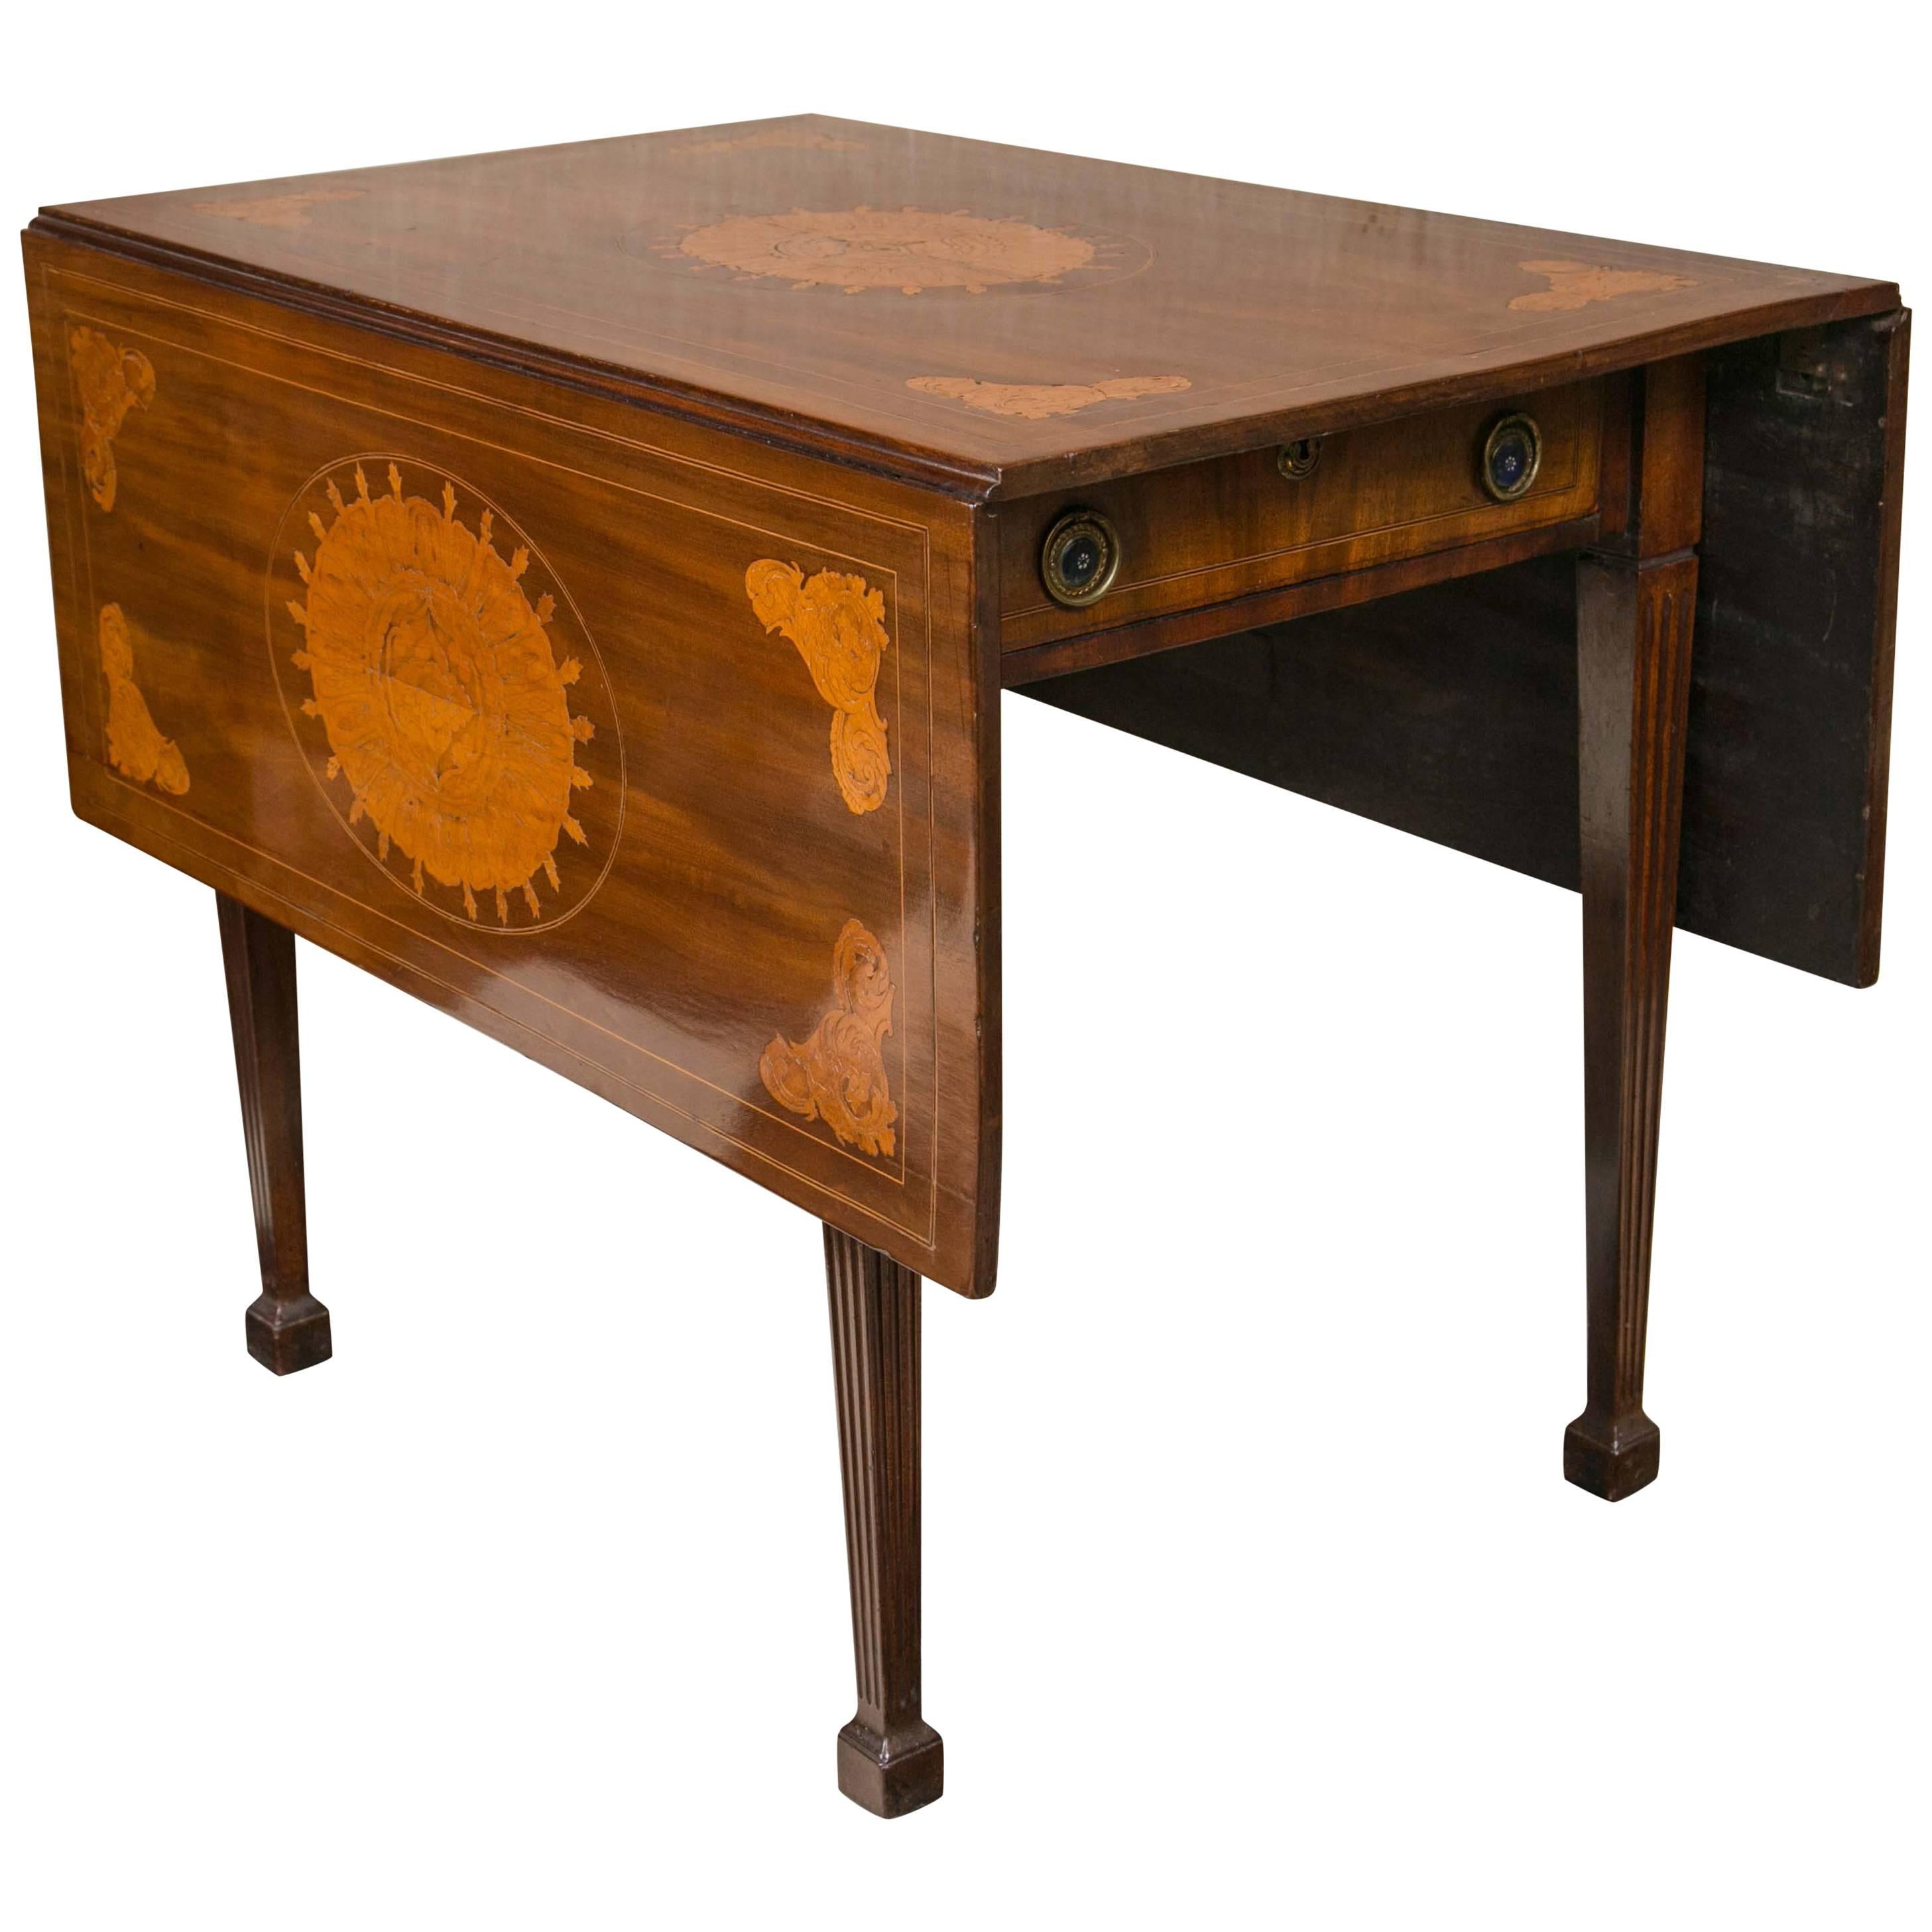 Dutch Drop-Leaf Table with Satinwood Inlay